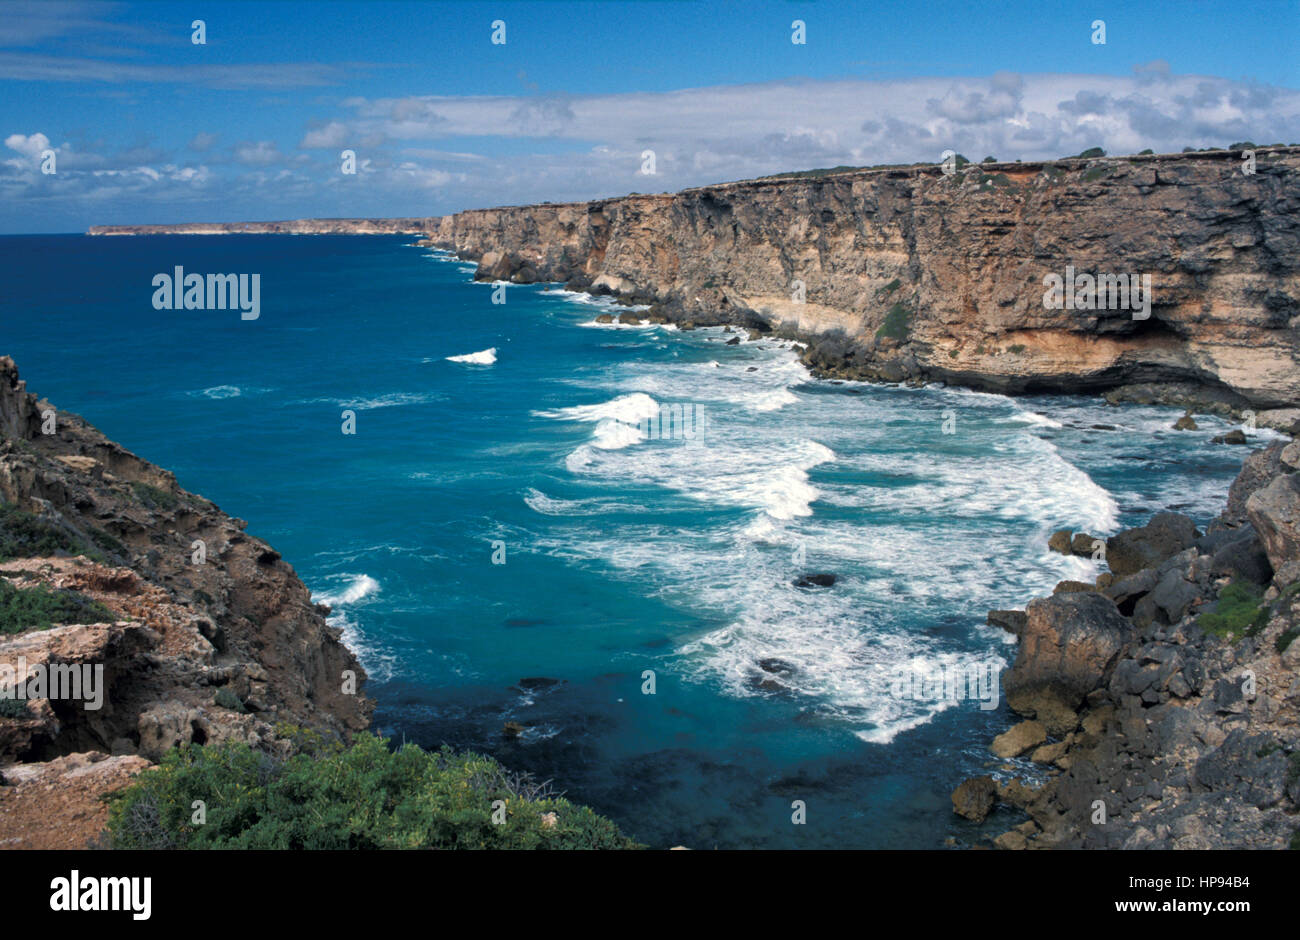 View over the cliffs of the Great Australian Bight Stock Photo